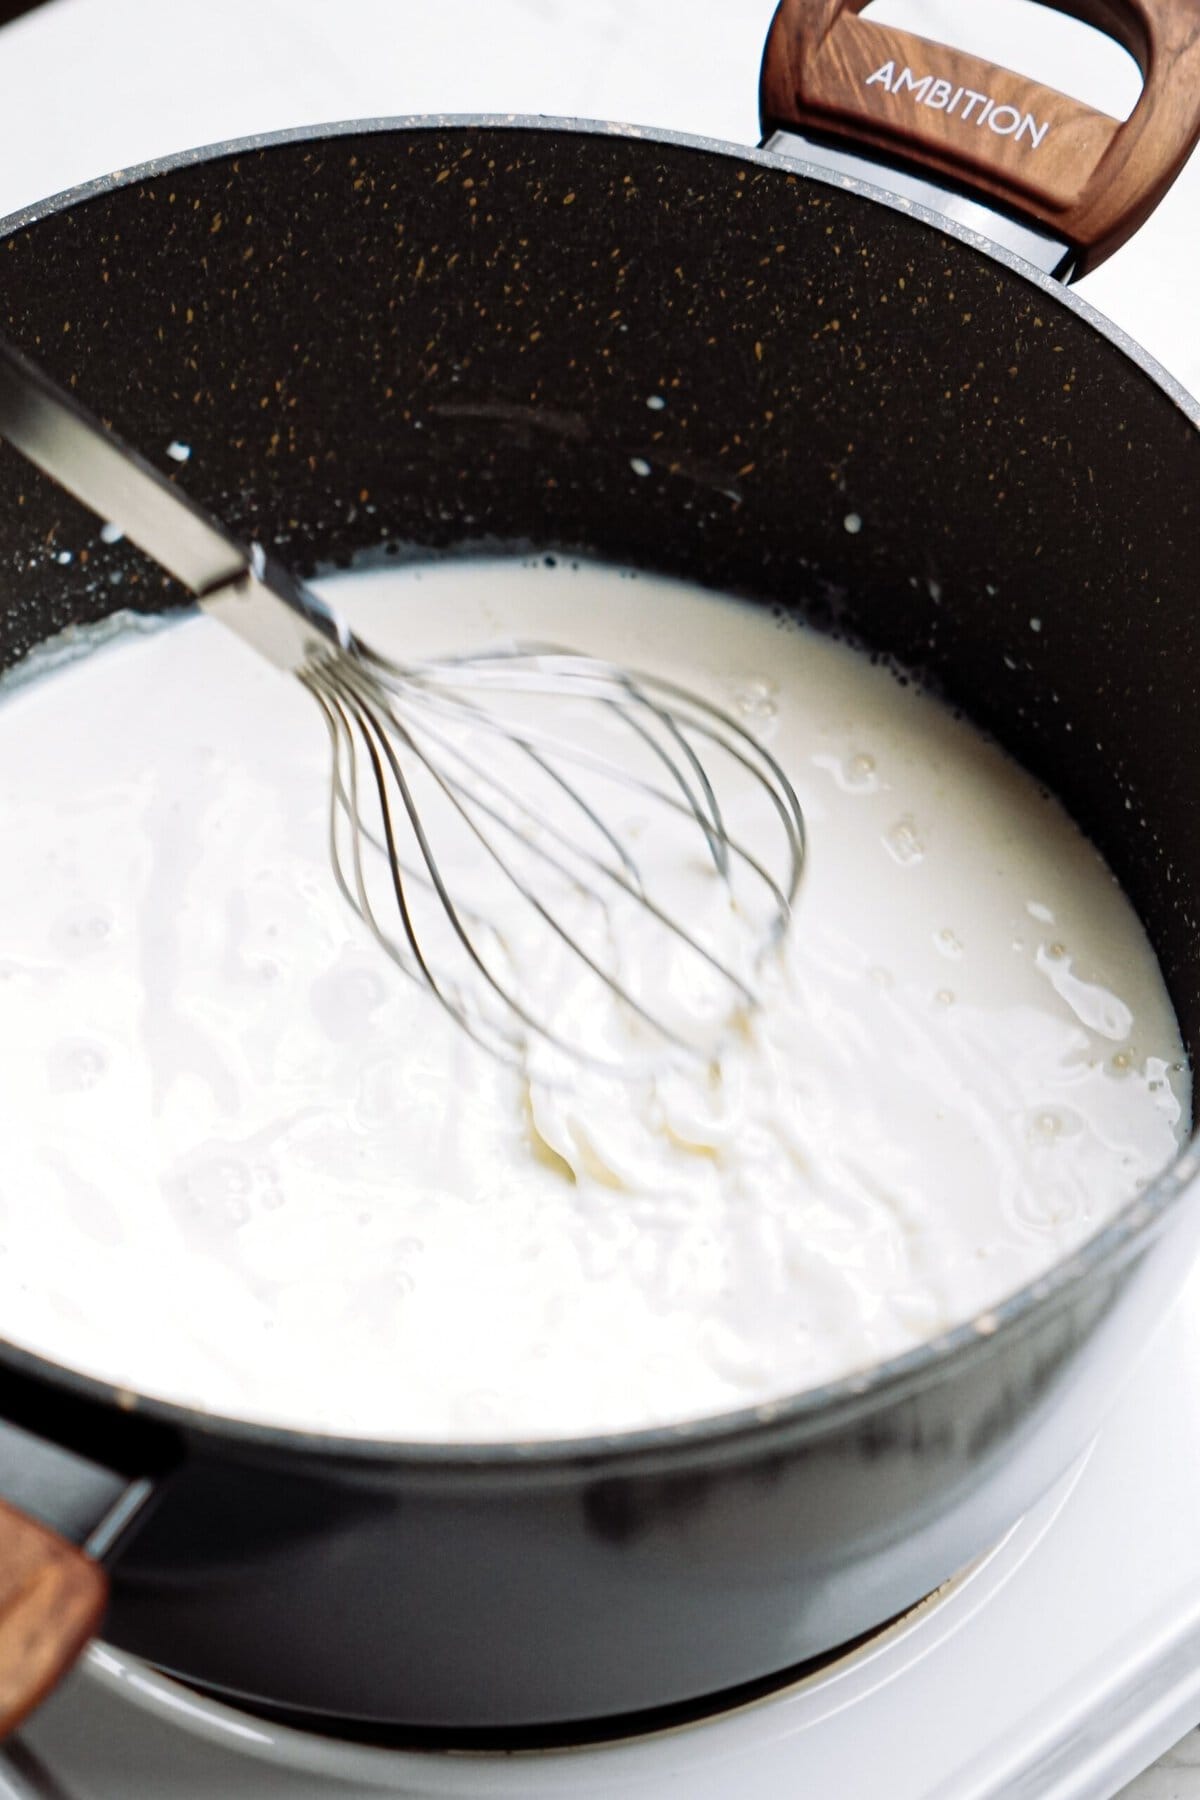 Milk being whisked in a non-stick frying pan.